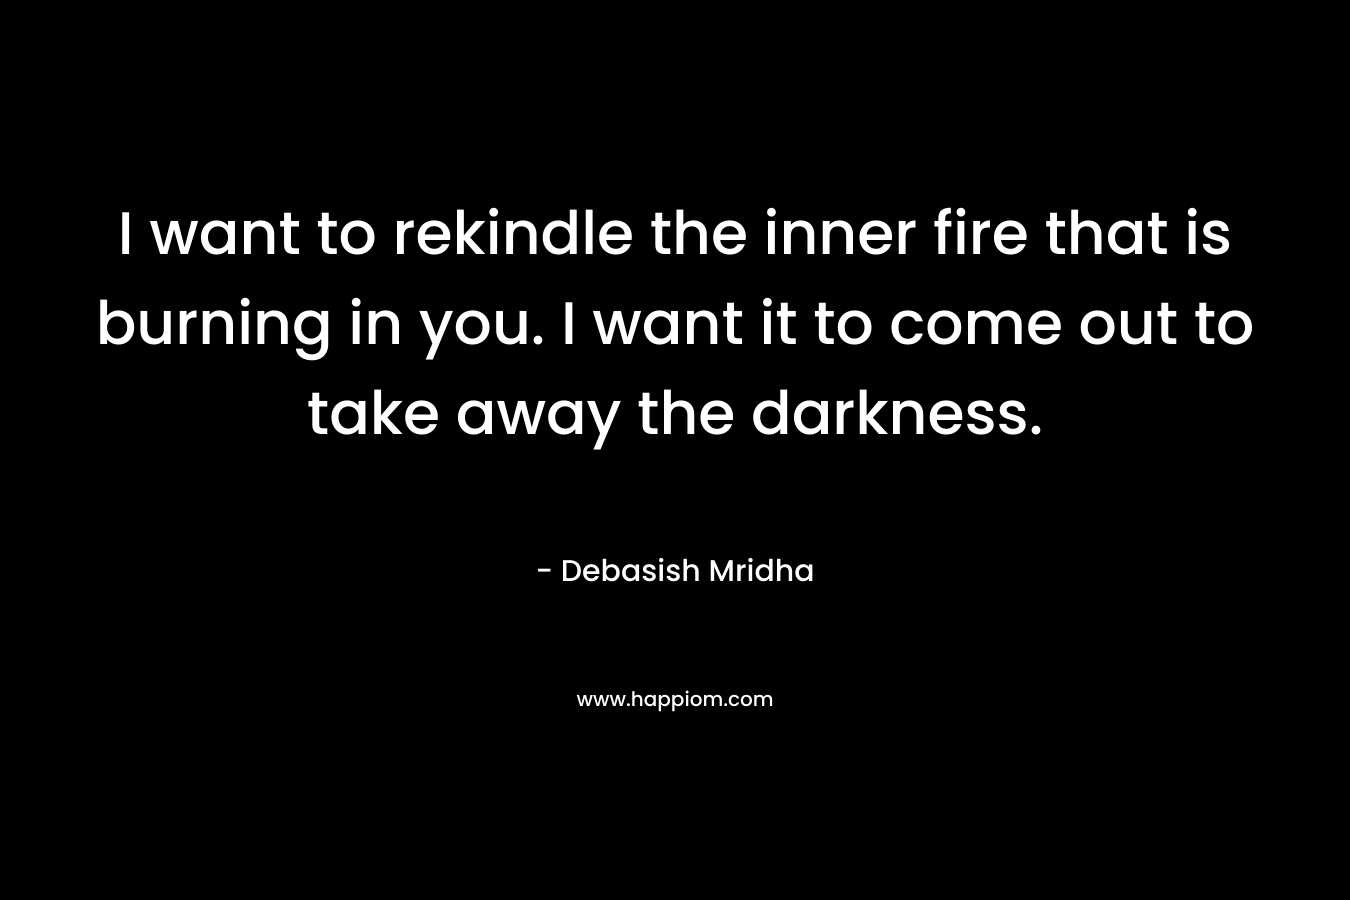 I want to rekindle the inner fire that is burning in you. I want it to come out to take away the darkness. – Debasish Mridha